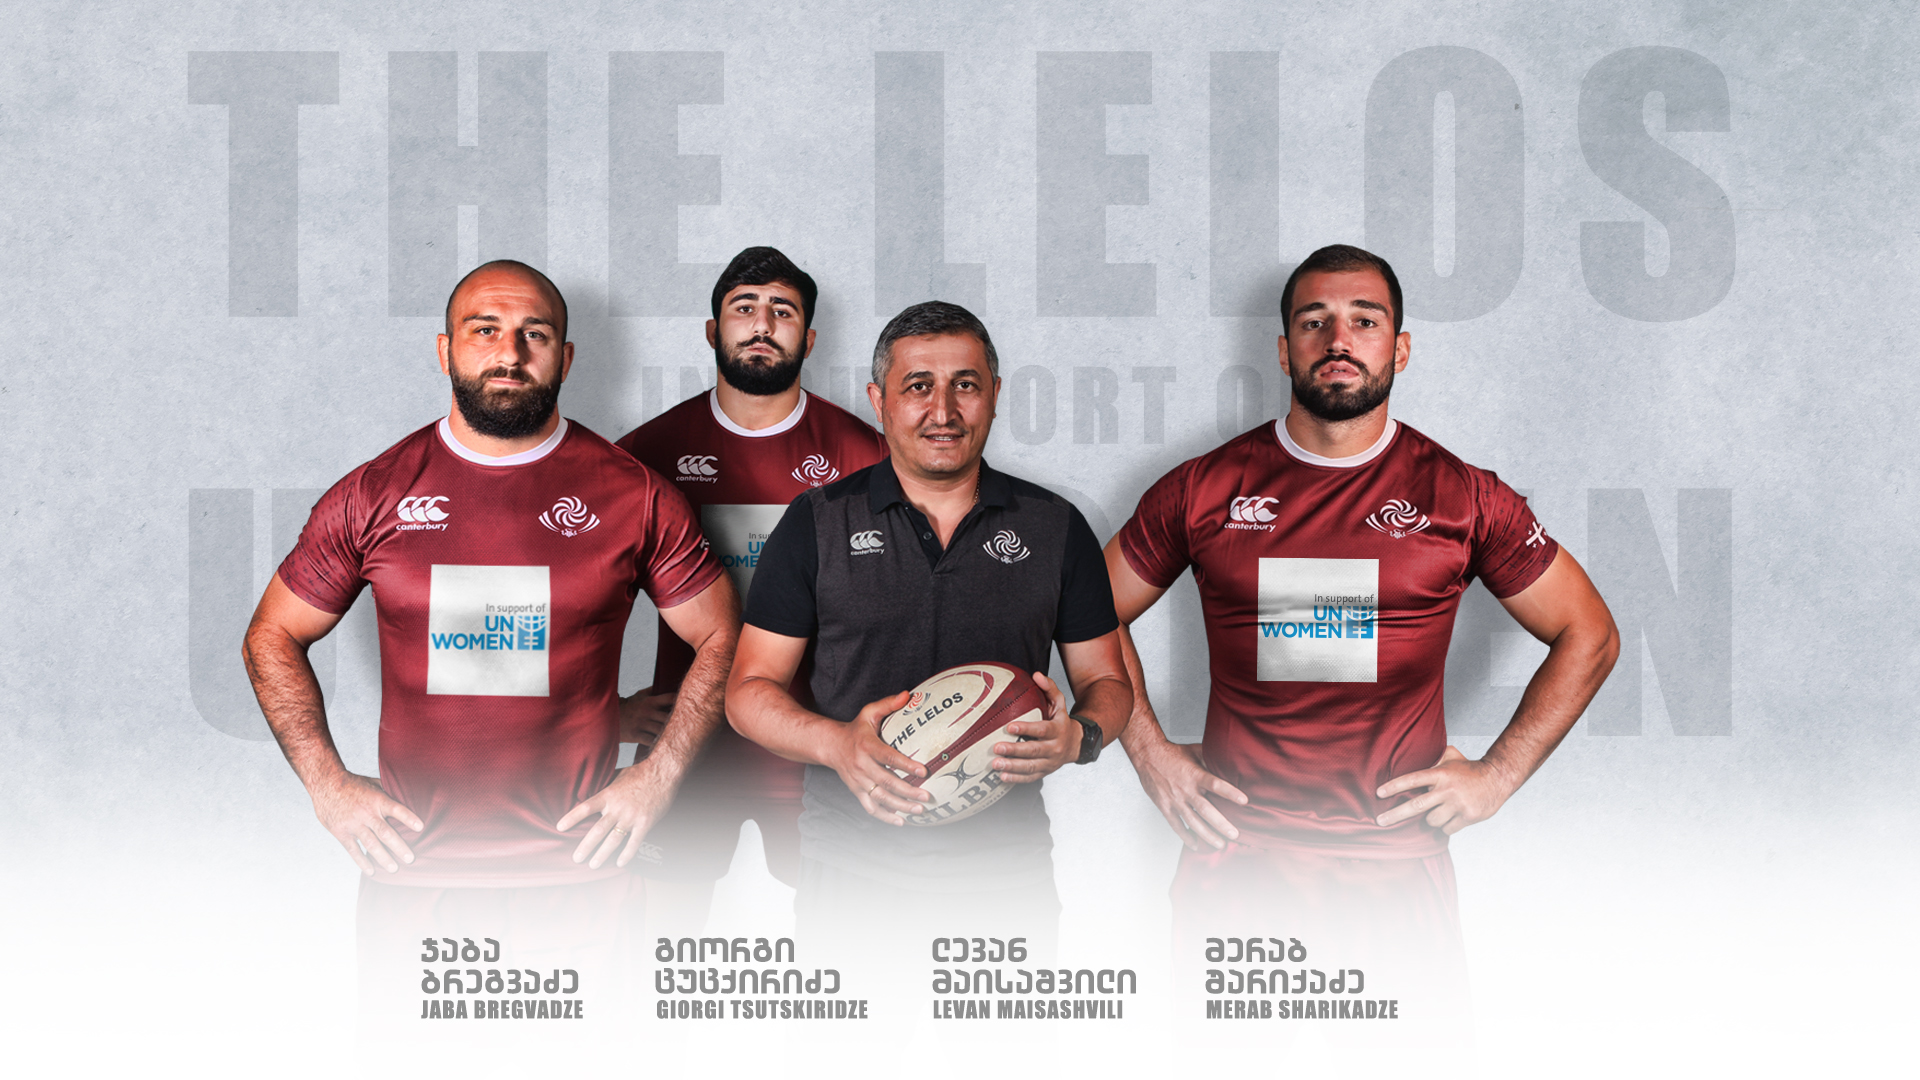 The Lelos to wear UN Women-branded shirts against South Africa & Scotland